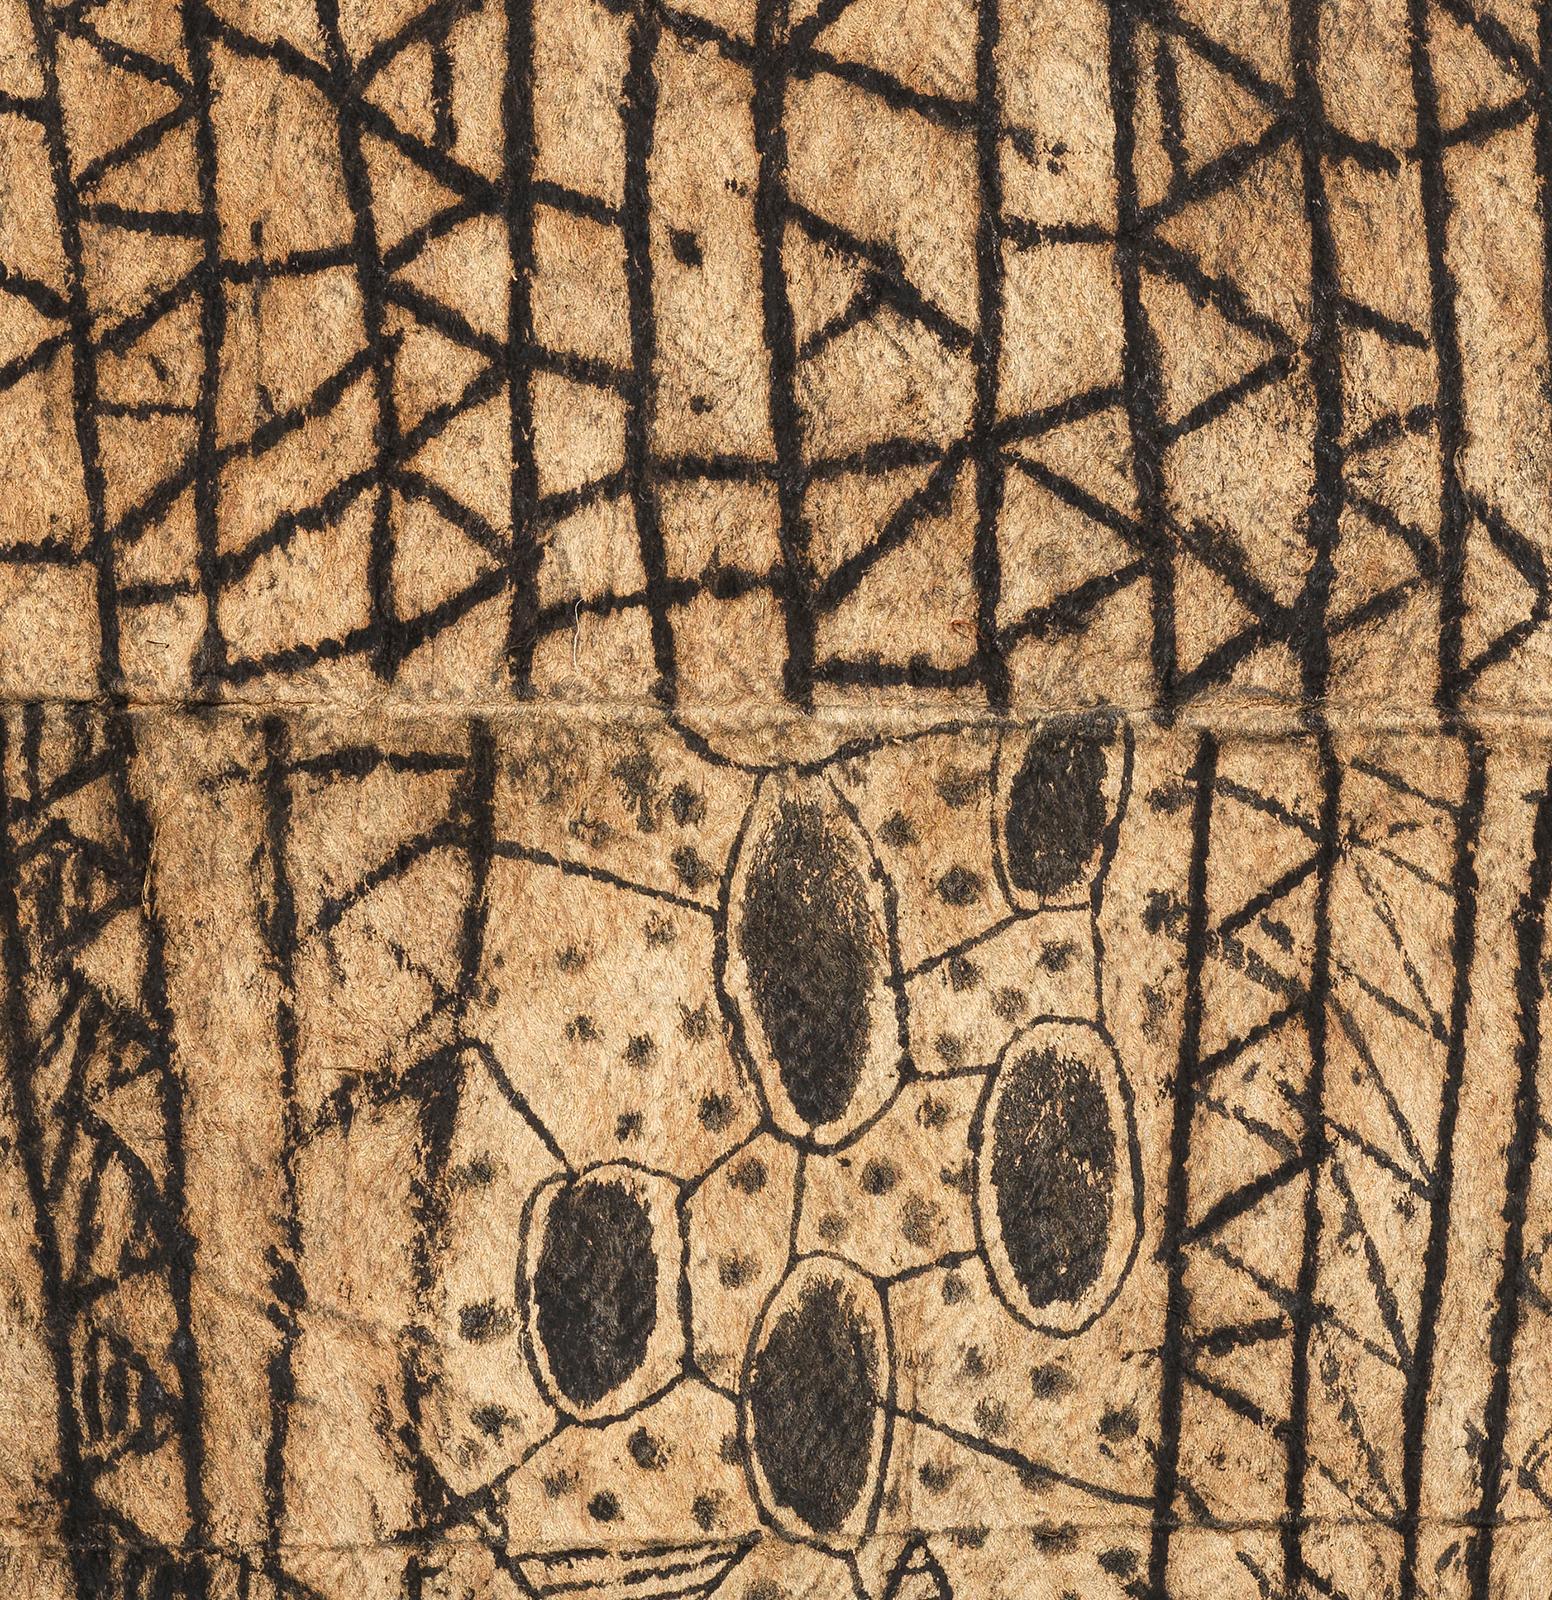 Mbuti painting on Bark Cloth
Ituri Forest, DR Congo
20th century
0.54 x 0.75m (1’9″ x 2’6″)

The eccentric biomorphic and linear geometries of Mbuti bark cloths, painted by women, are impressionistic responses to the organic textures, patterning,